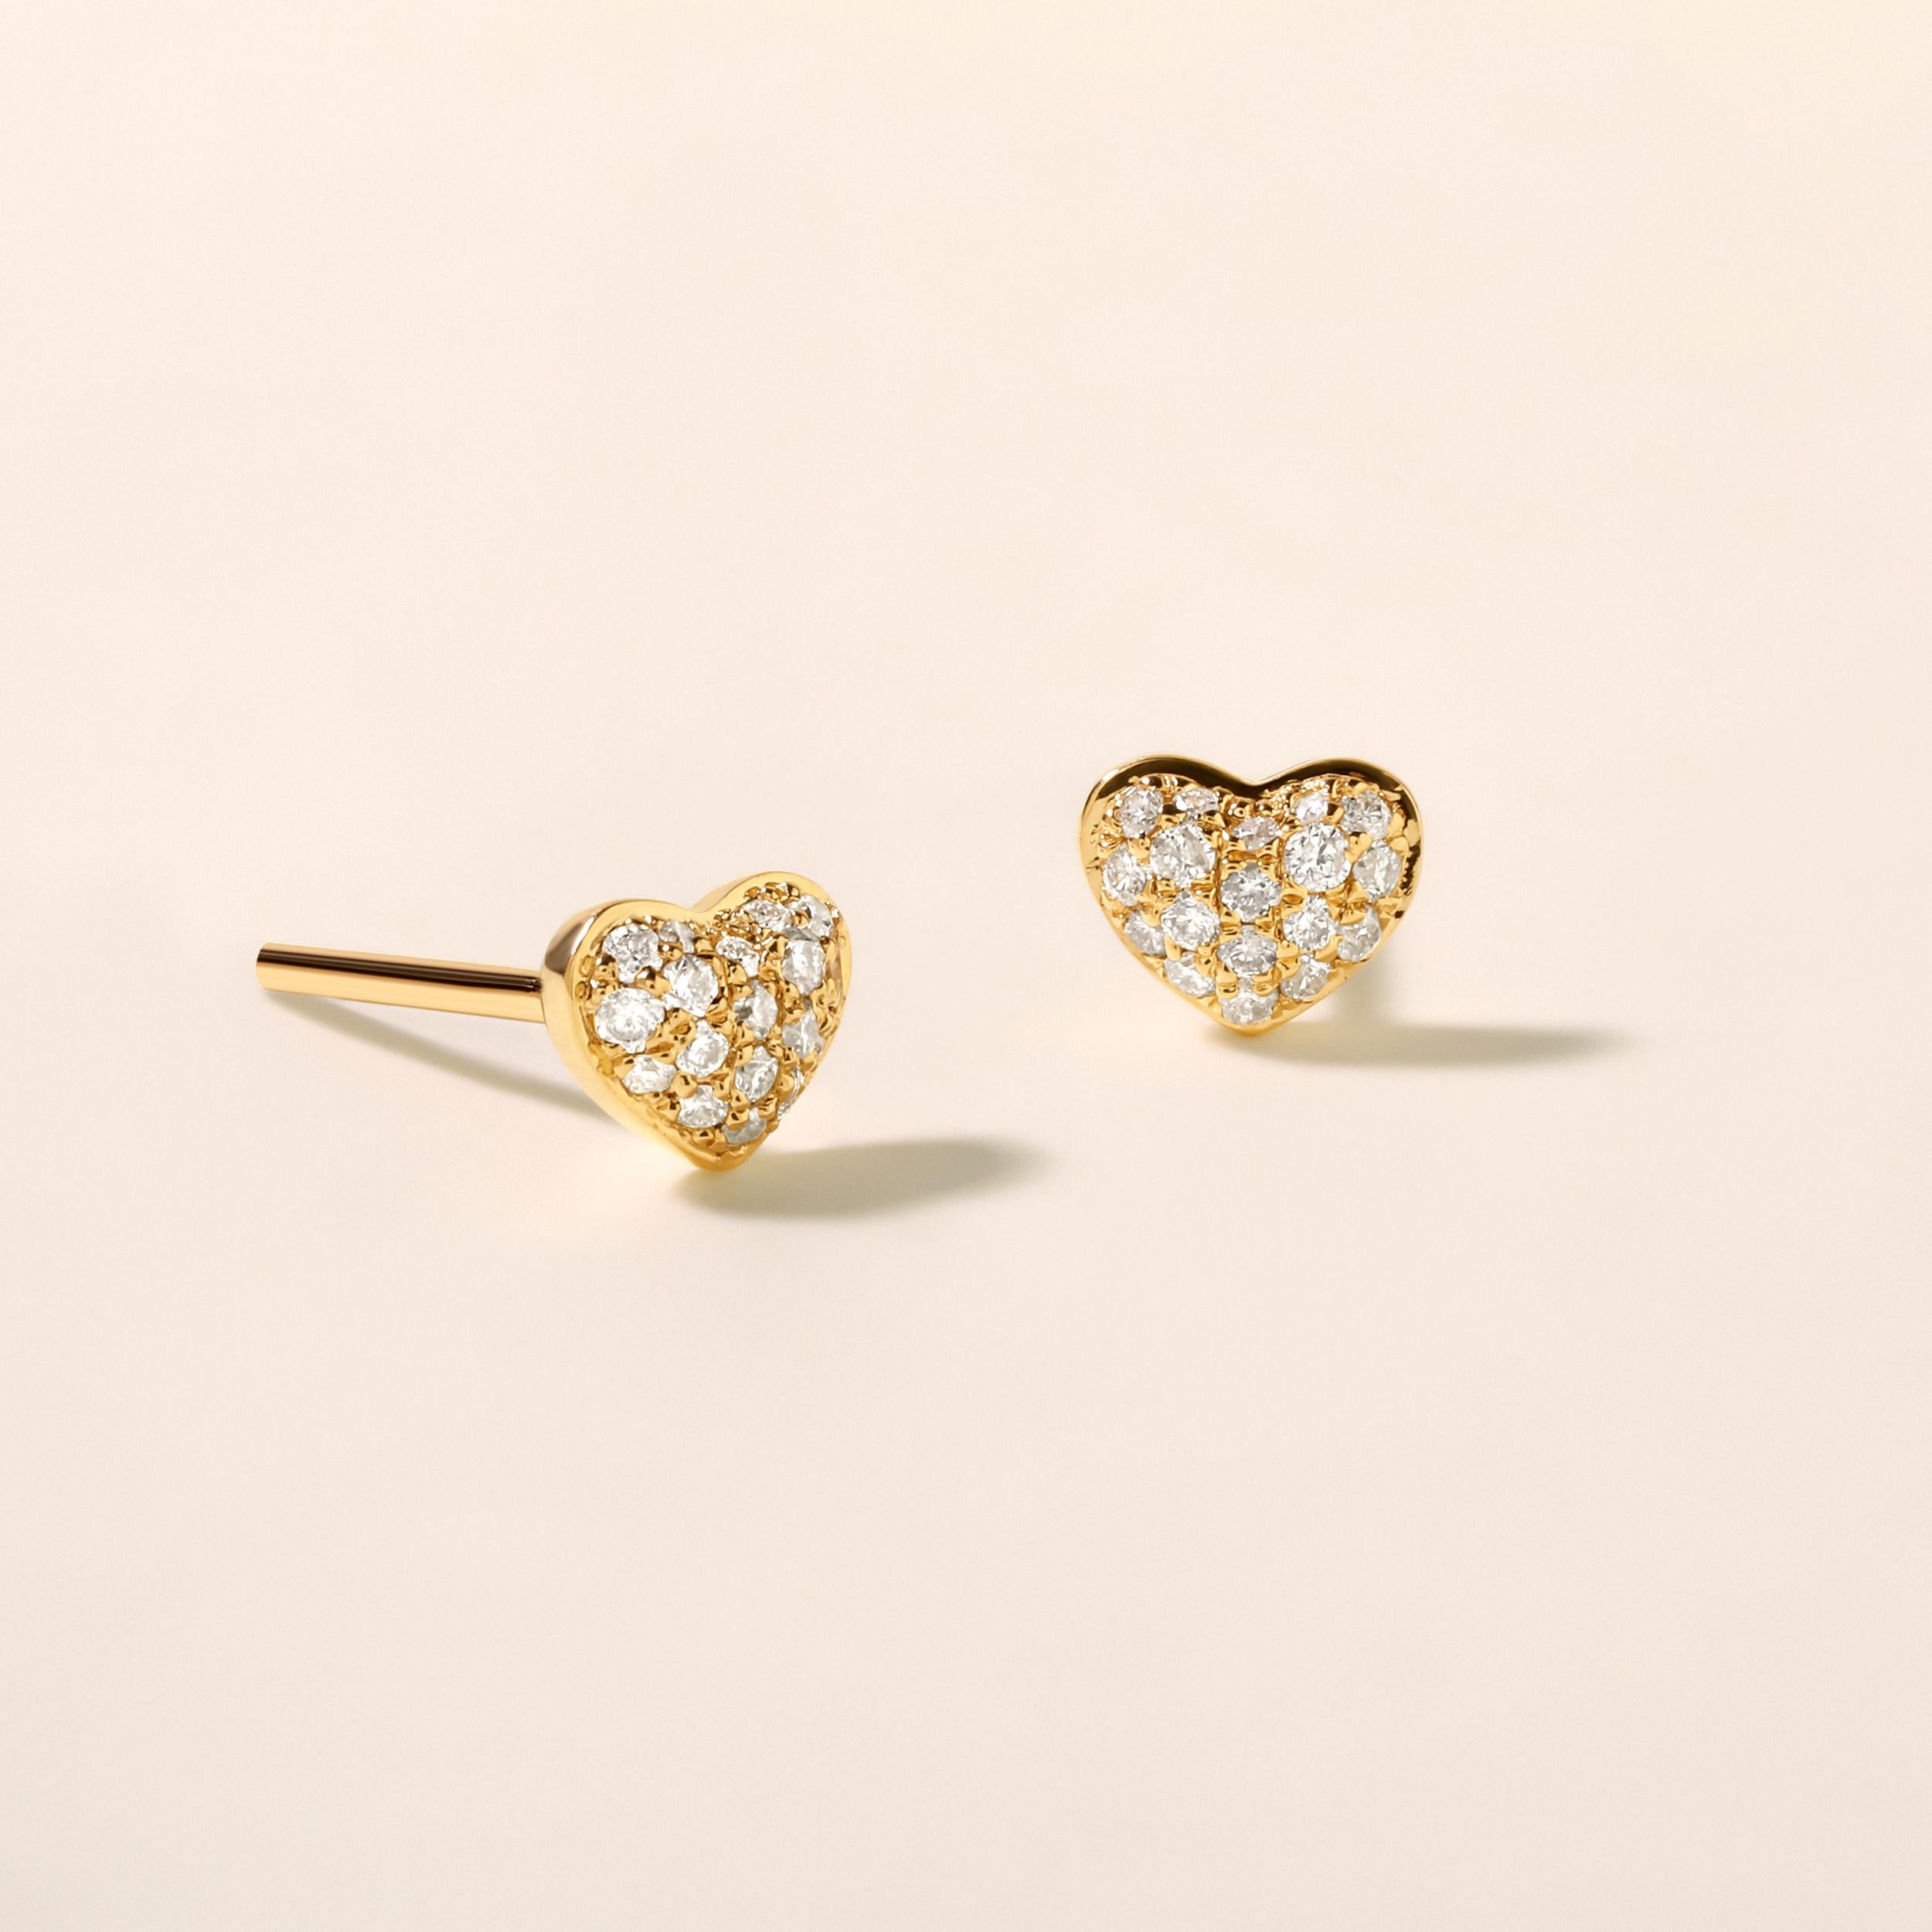 Crafted in 1 gram of 14K Yellow Gold, the earrings contains 36 stones of Round Diamonds with a total of 0.14 carat in F-G color and I1-I2 clarity.
This jewelry piece will be expertly crafted by our skilled artisans upon order. Allow us a shipping